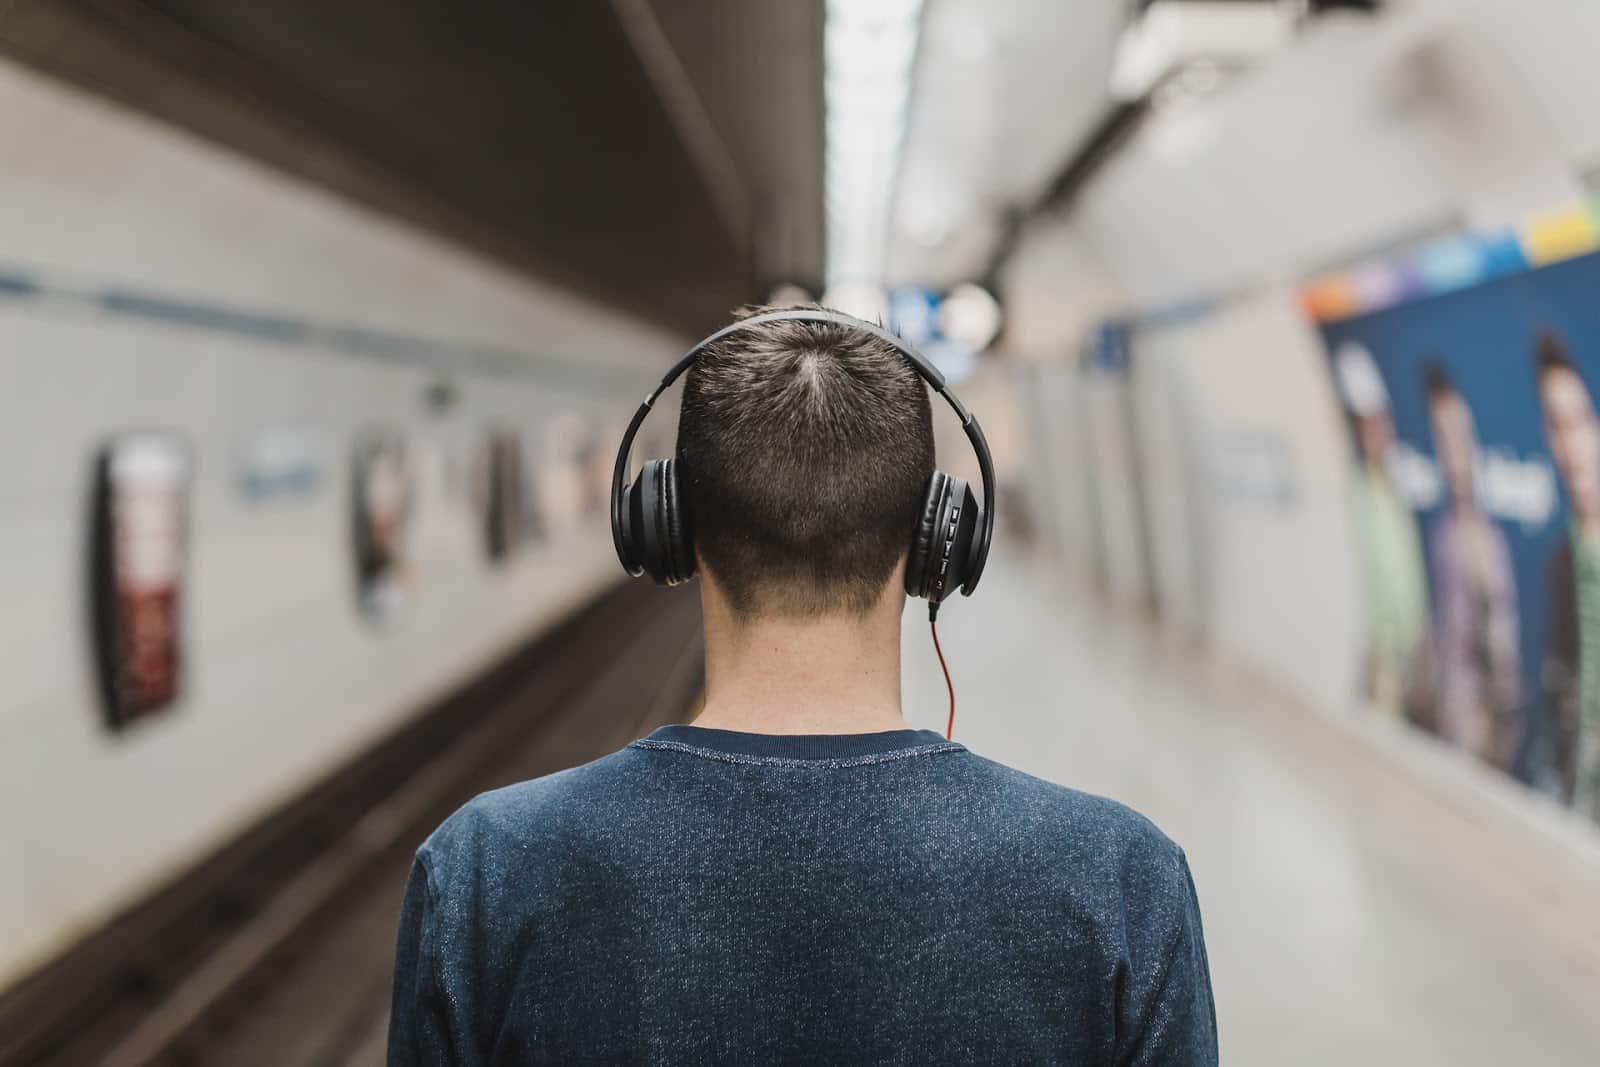 Man wearing headphones at a train station listening to a podcast.